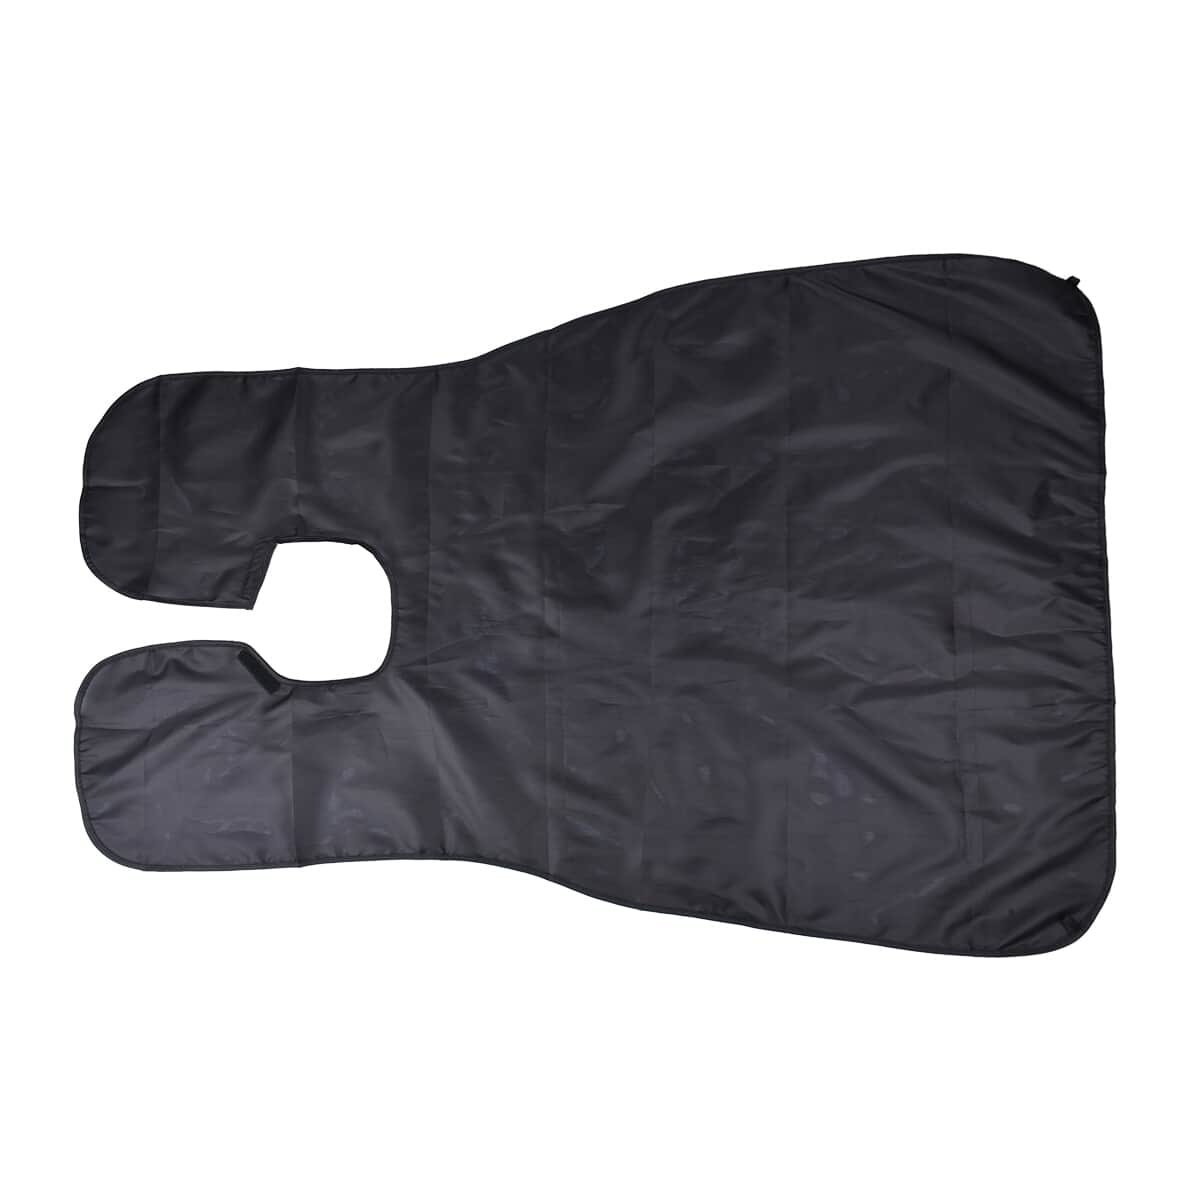 Male Beard Apron with 2 Suction Cup - Black image number 0